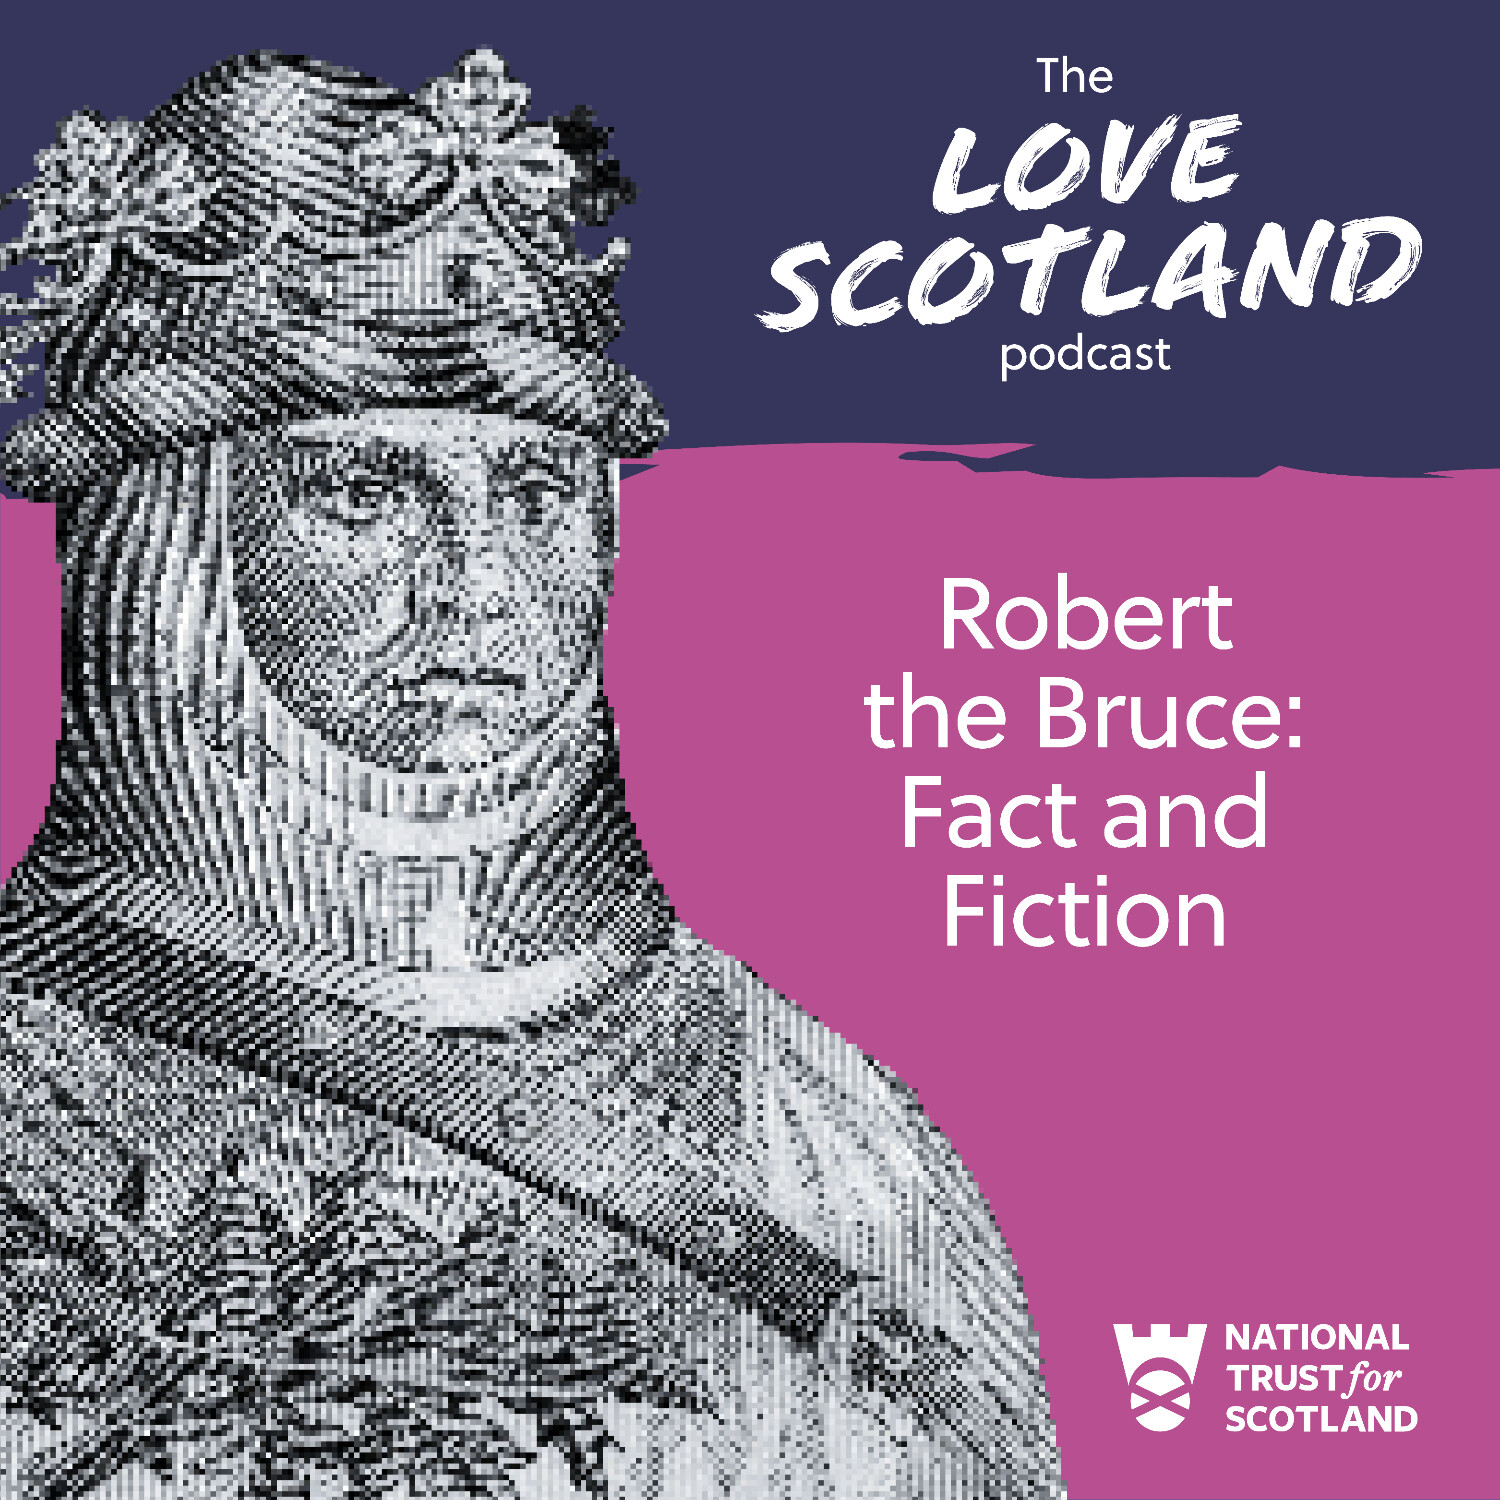 Robert the Bruce: Fact and Fiction